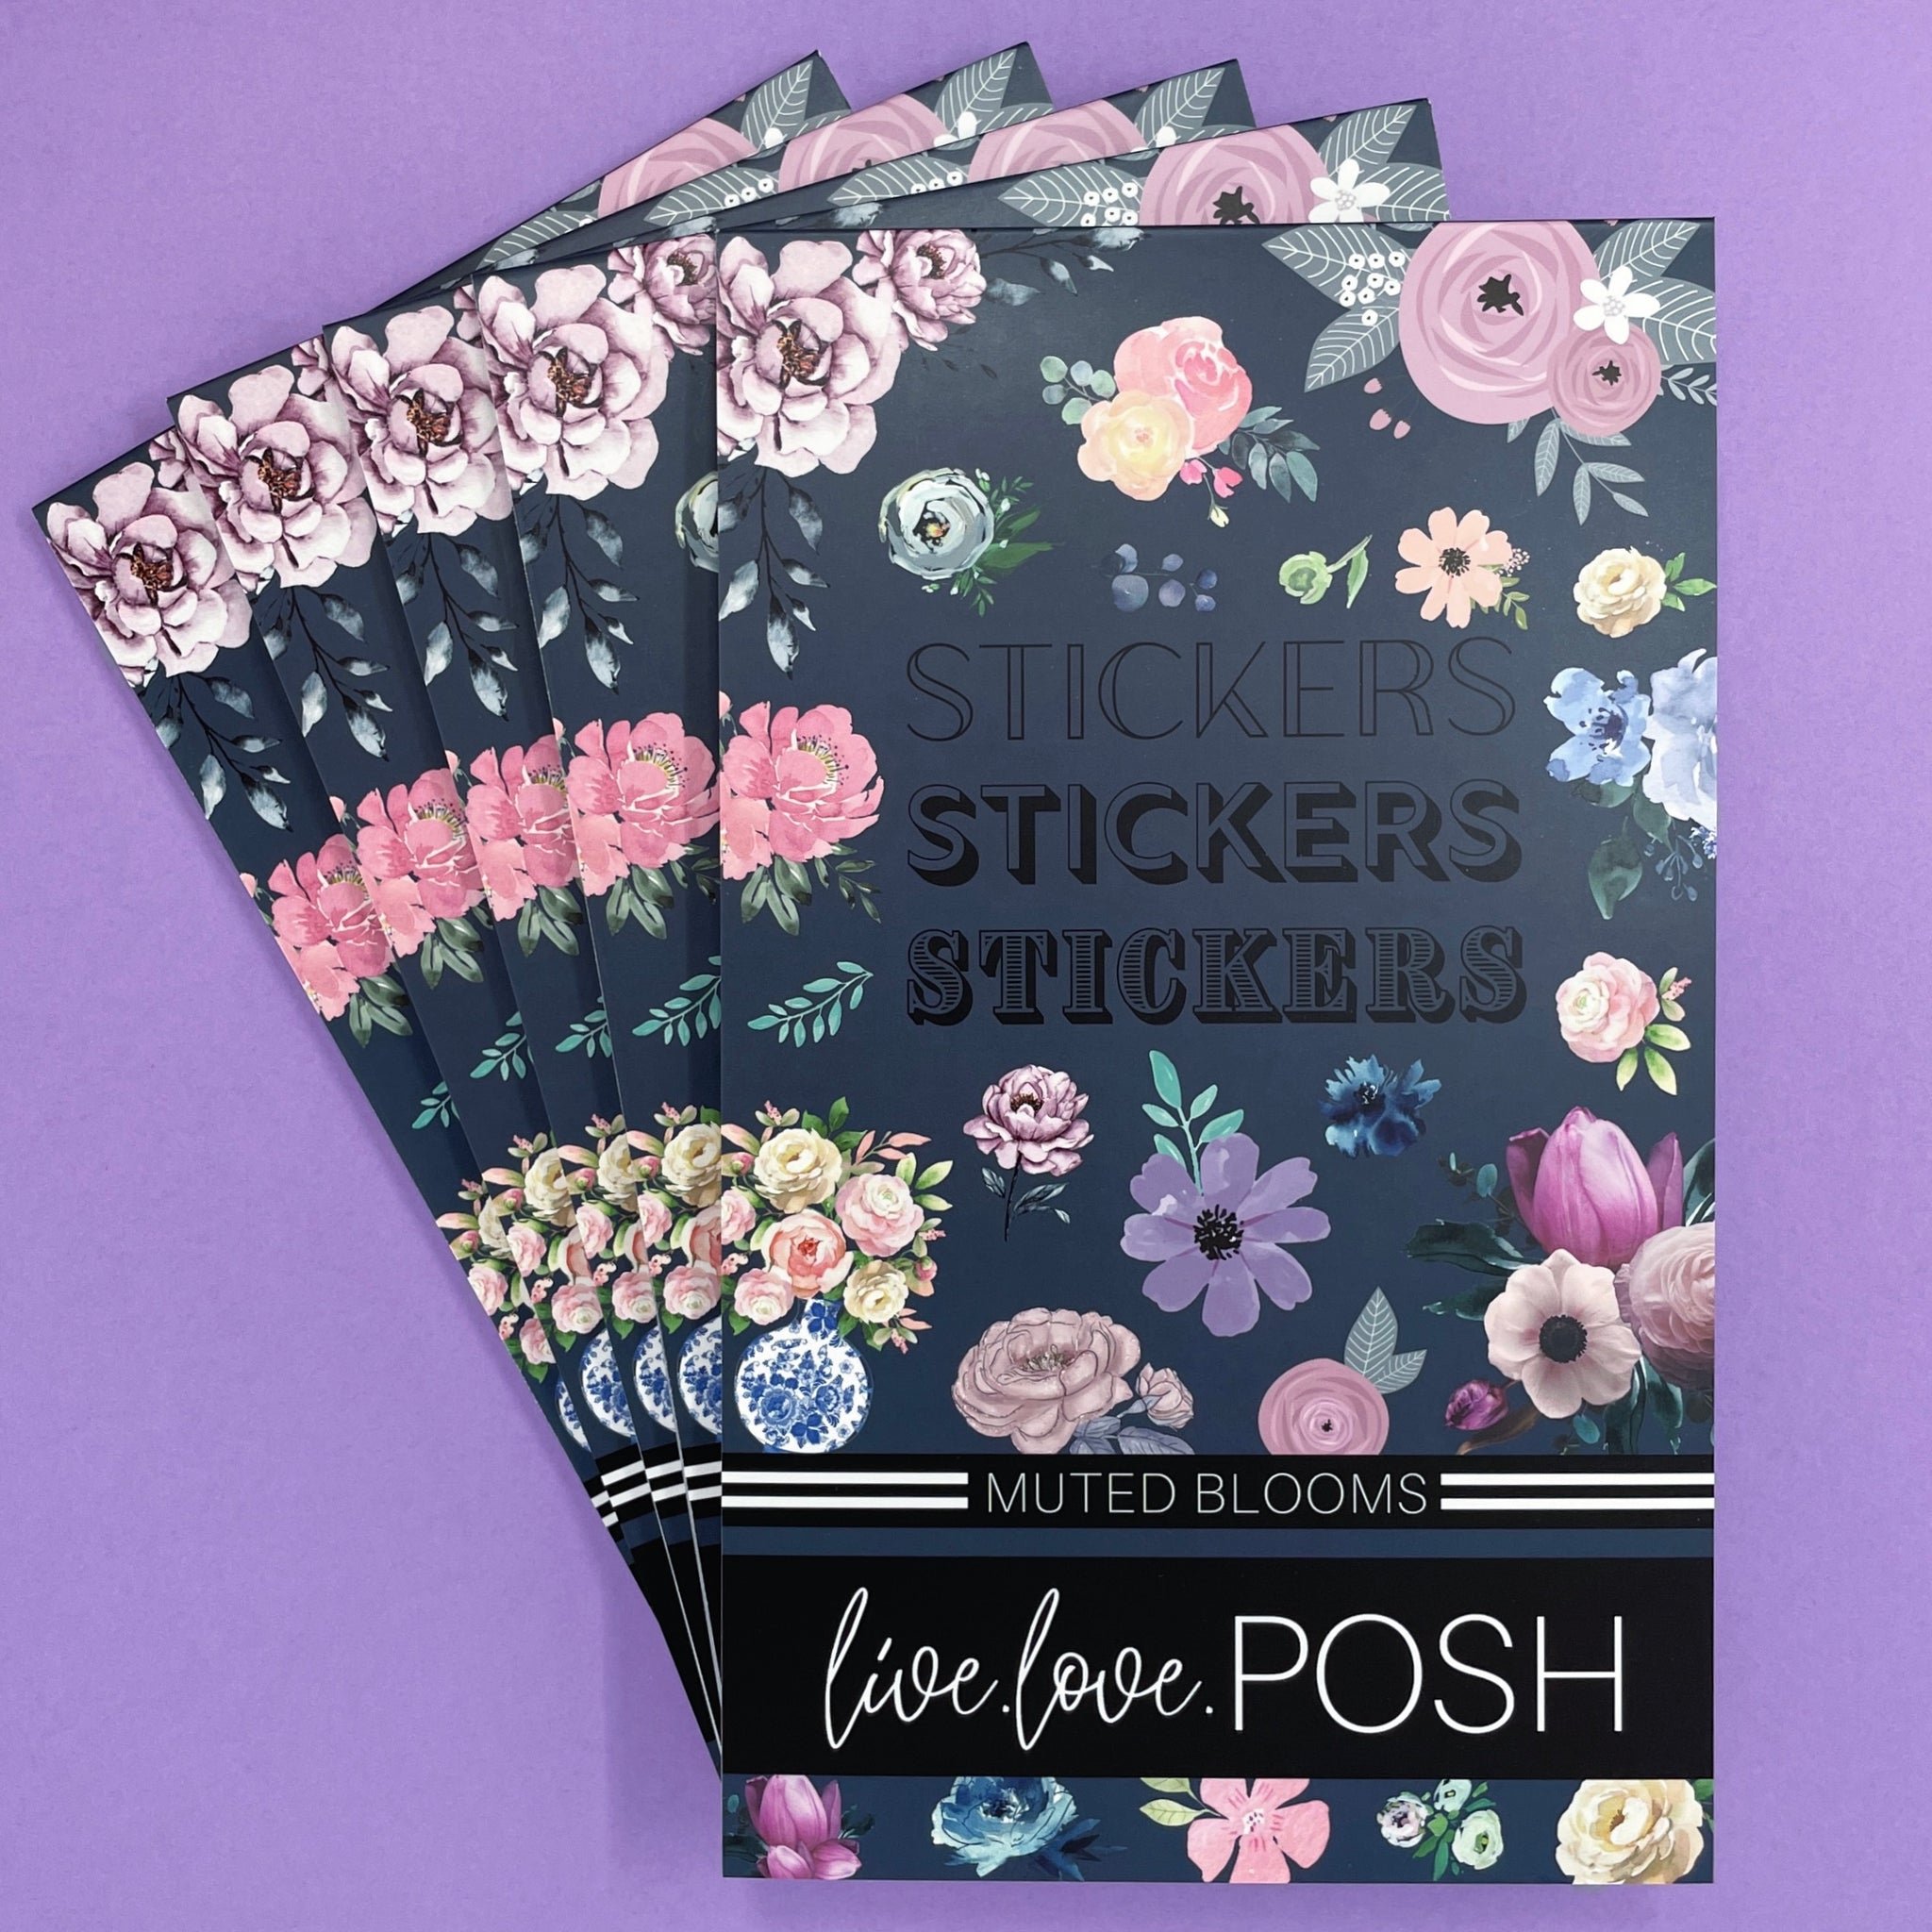 "OOPS" MUTED BLOOMS STICKER BOOK